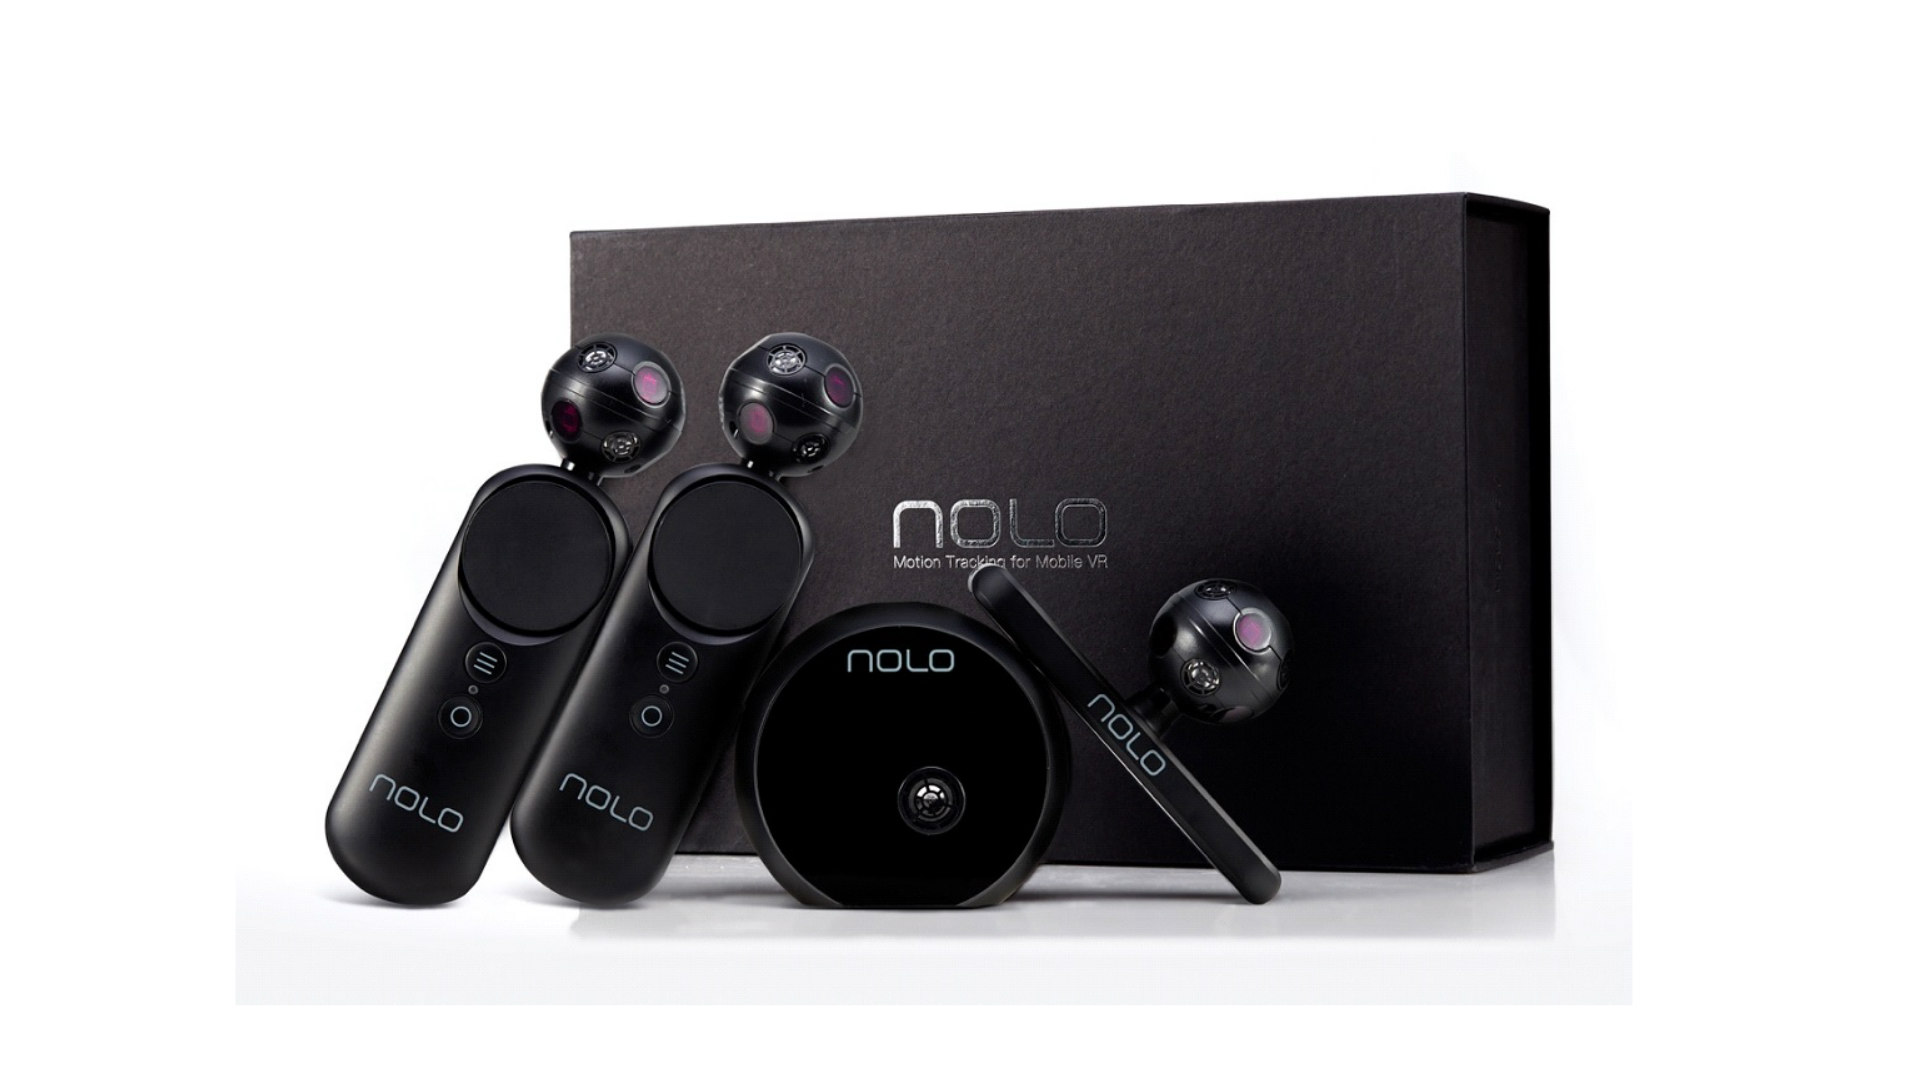 NOLO VR Raises $15M to Further Develop 6DOF Tracking Tech | Road to VR